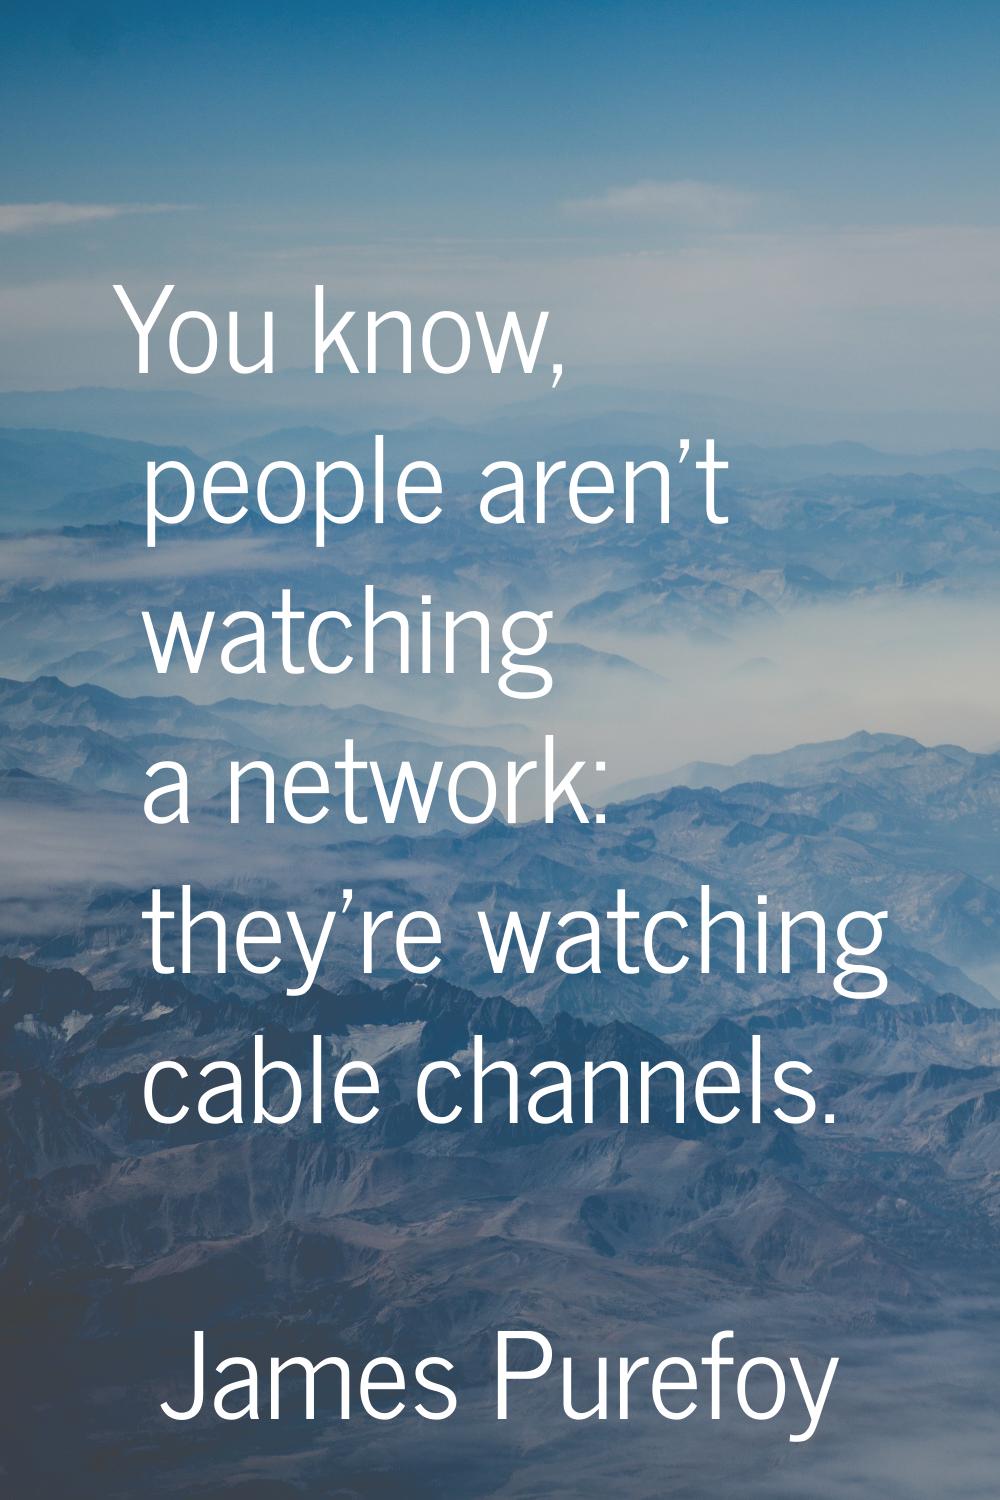 You know, people aren't watching a network: they're watching cable channels.